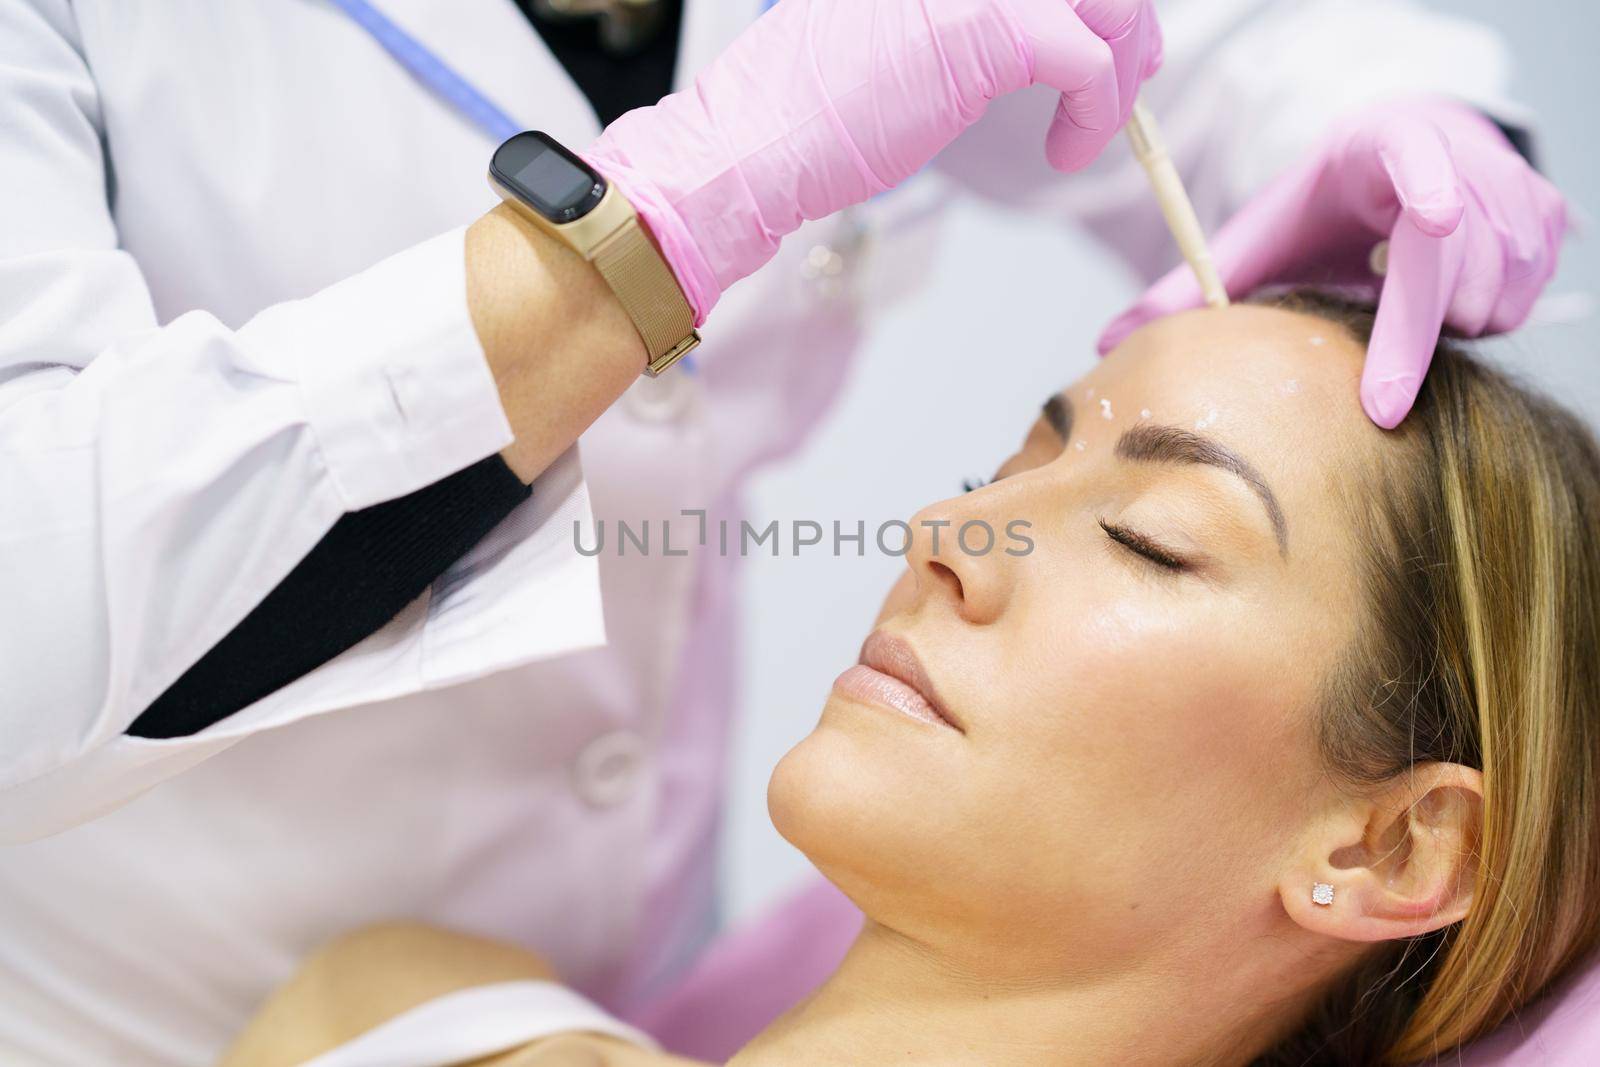 Aesthetic doctor painting on the face of his middle-aged patient the areas to be treated with botox.